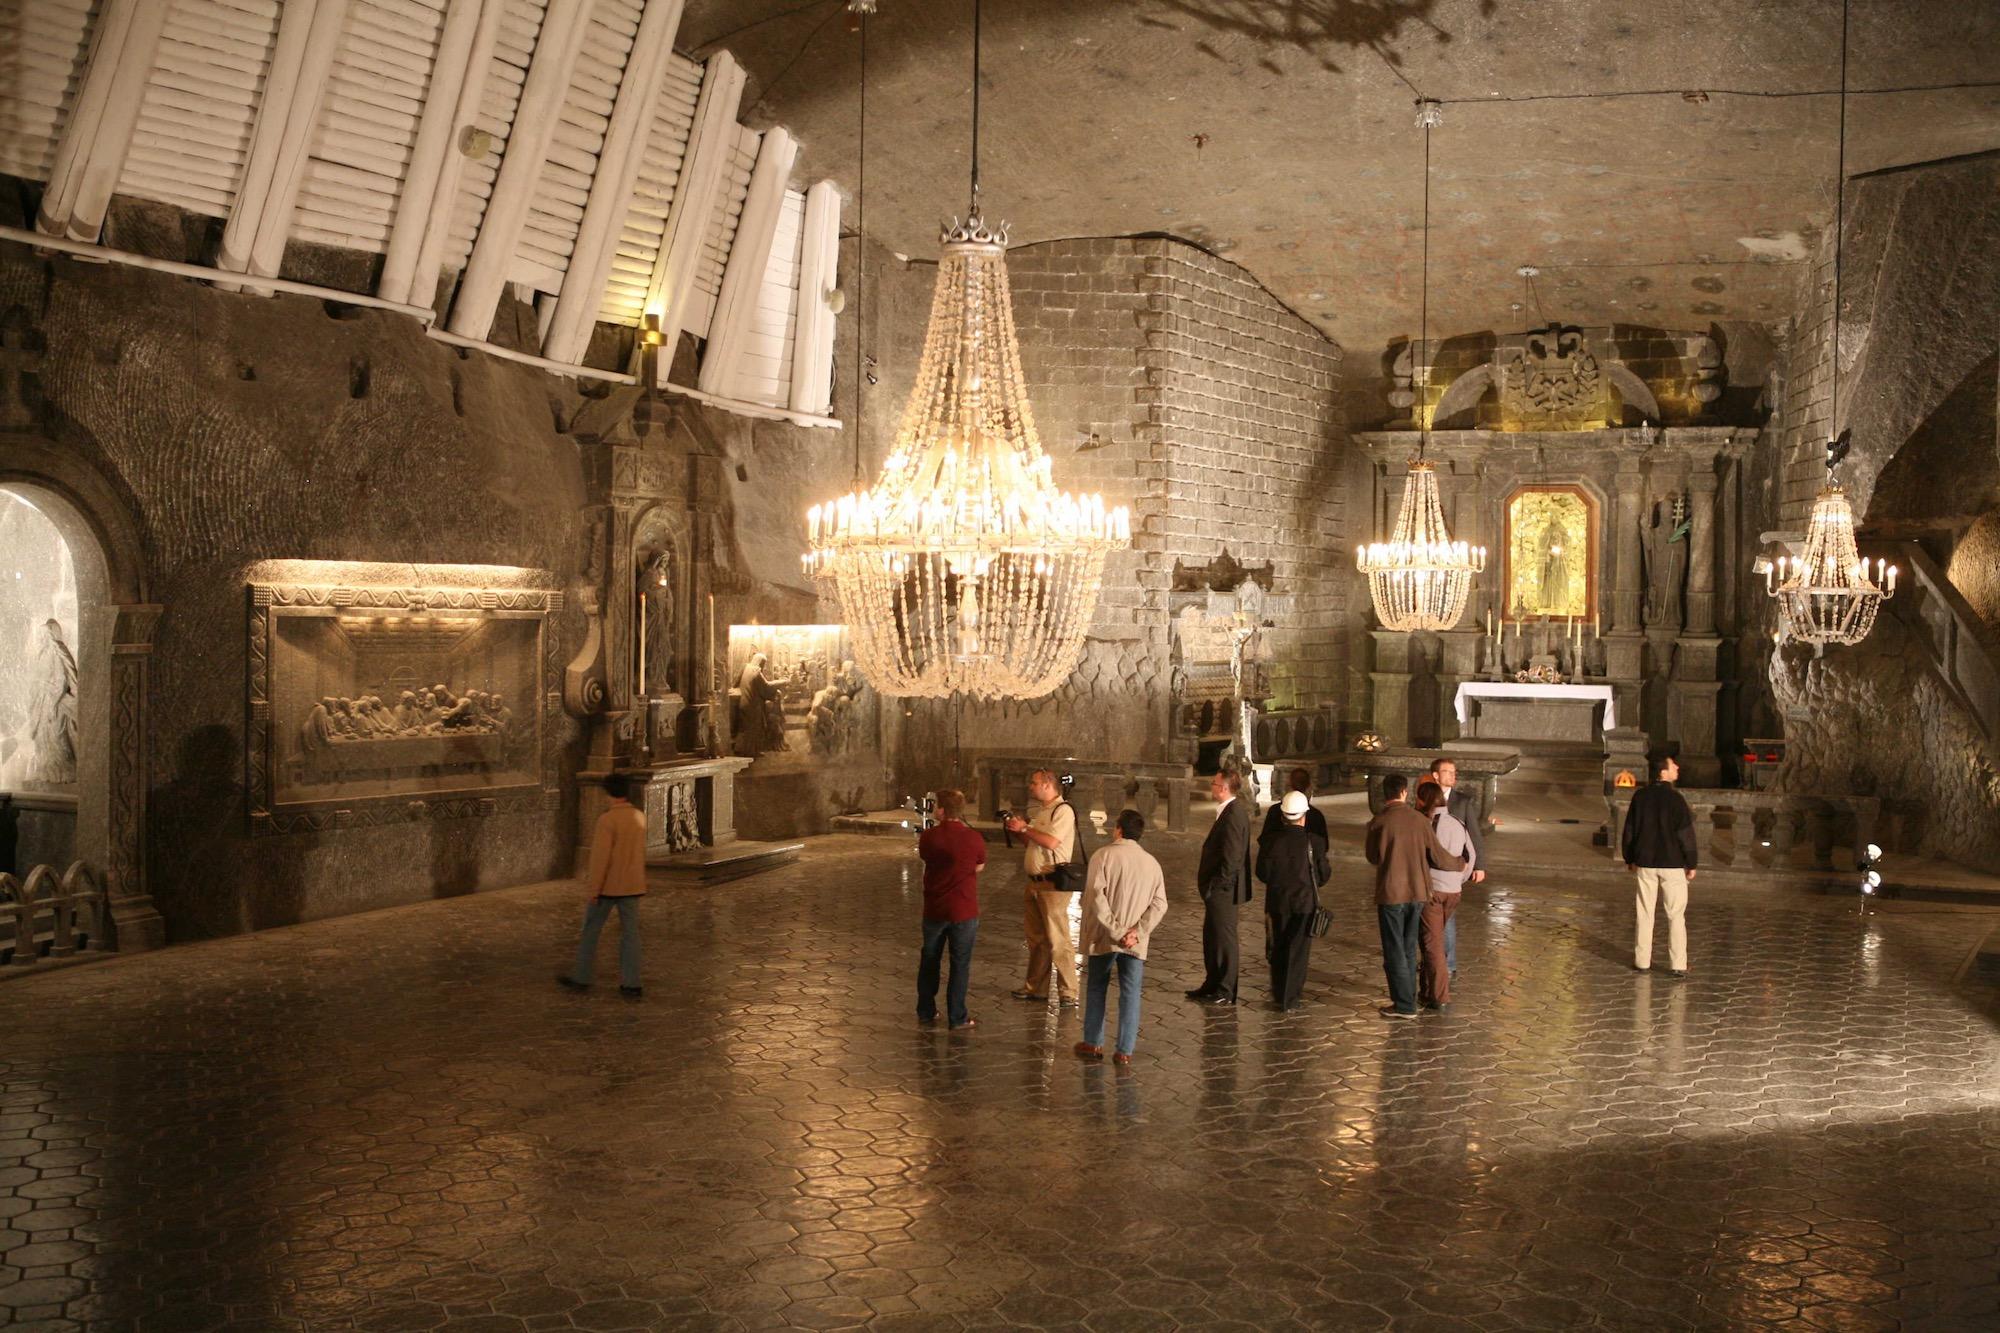 The Chapel of Saint Kinga, an enormous hall lit by salt crystal chandeliers that took three men 67 years to carve and decorate. – © Rafal Stachurski